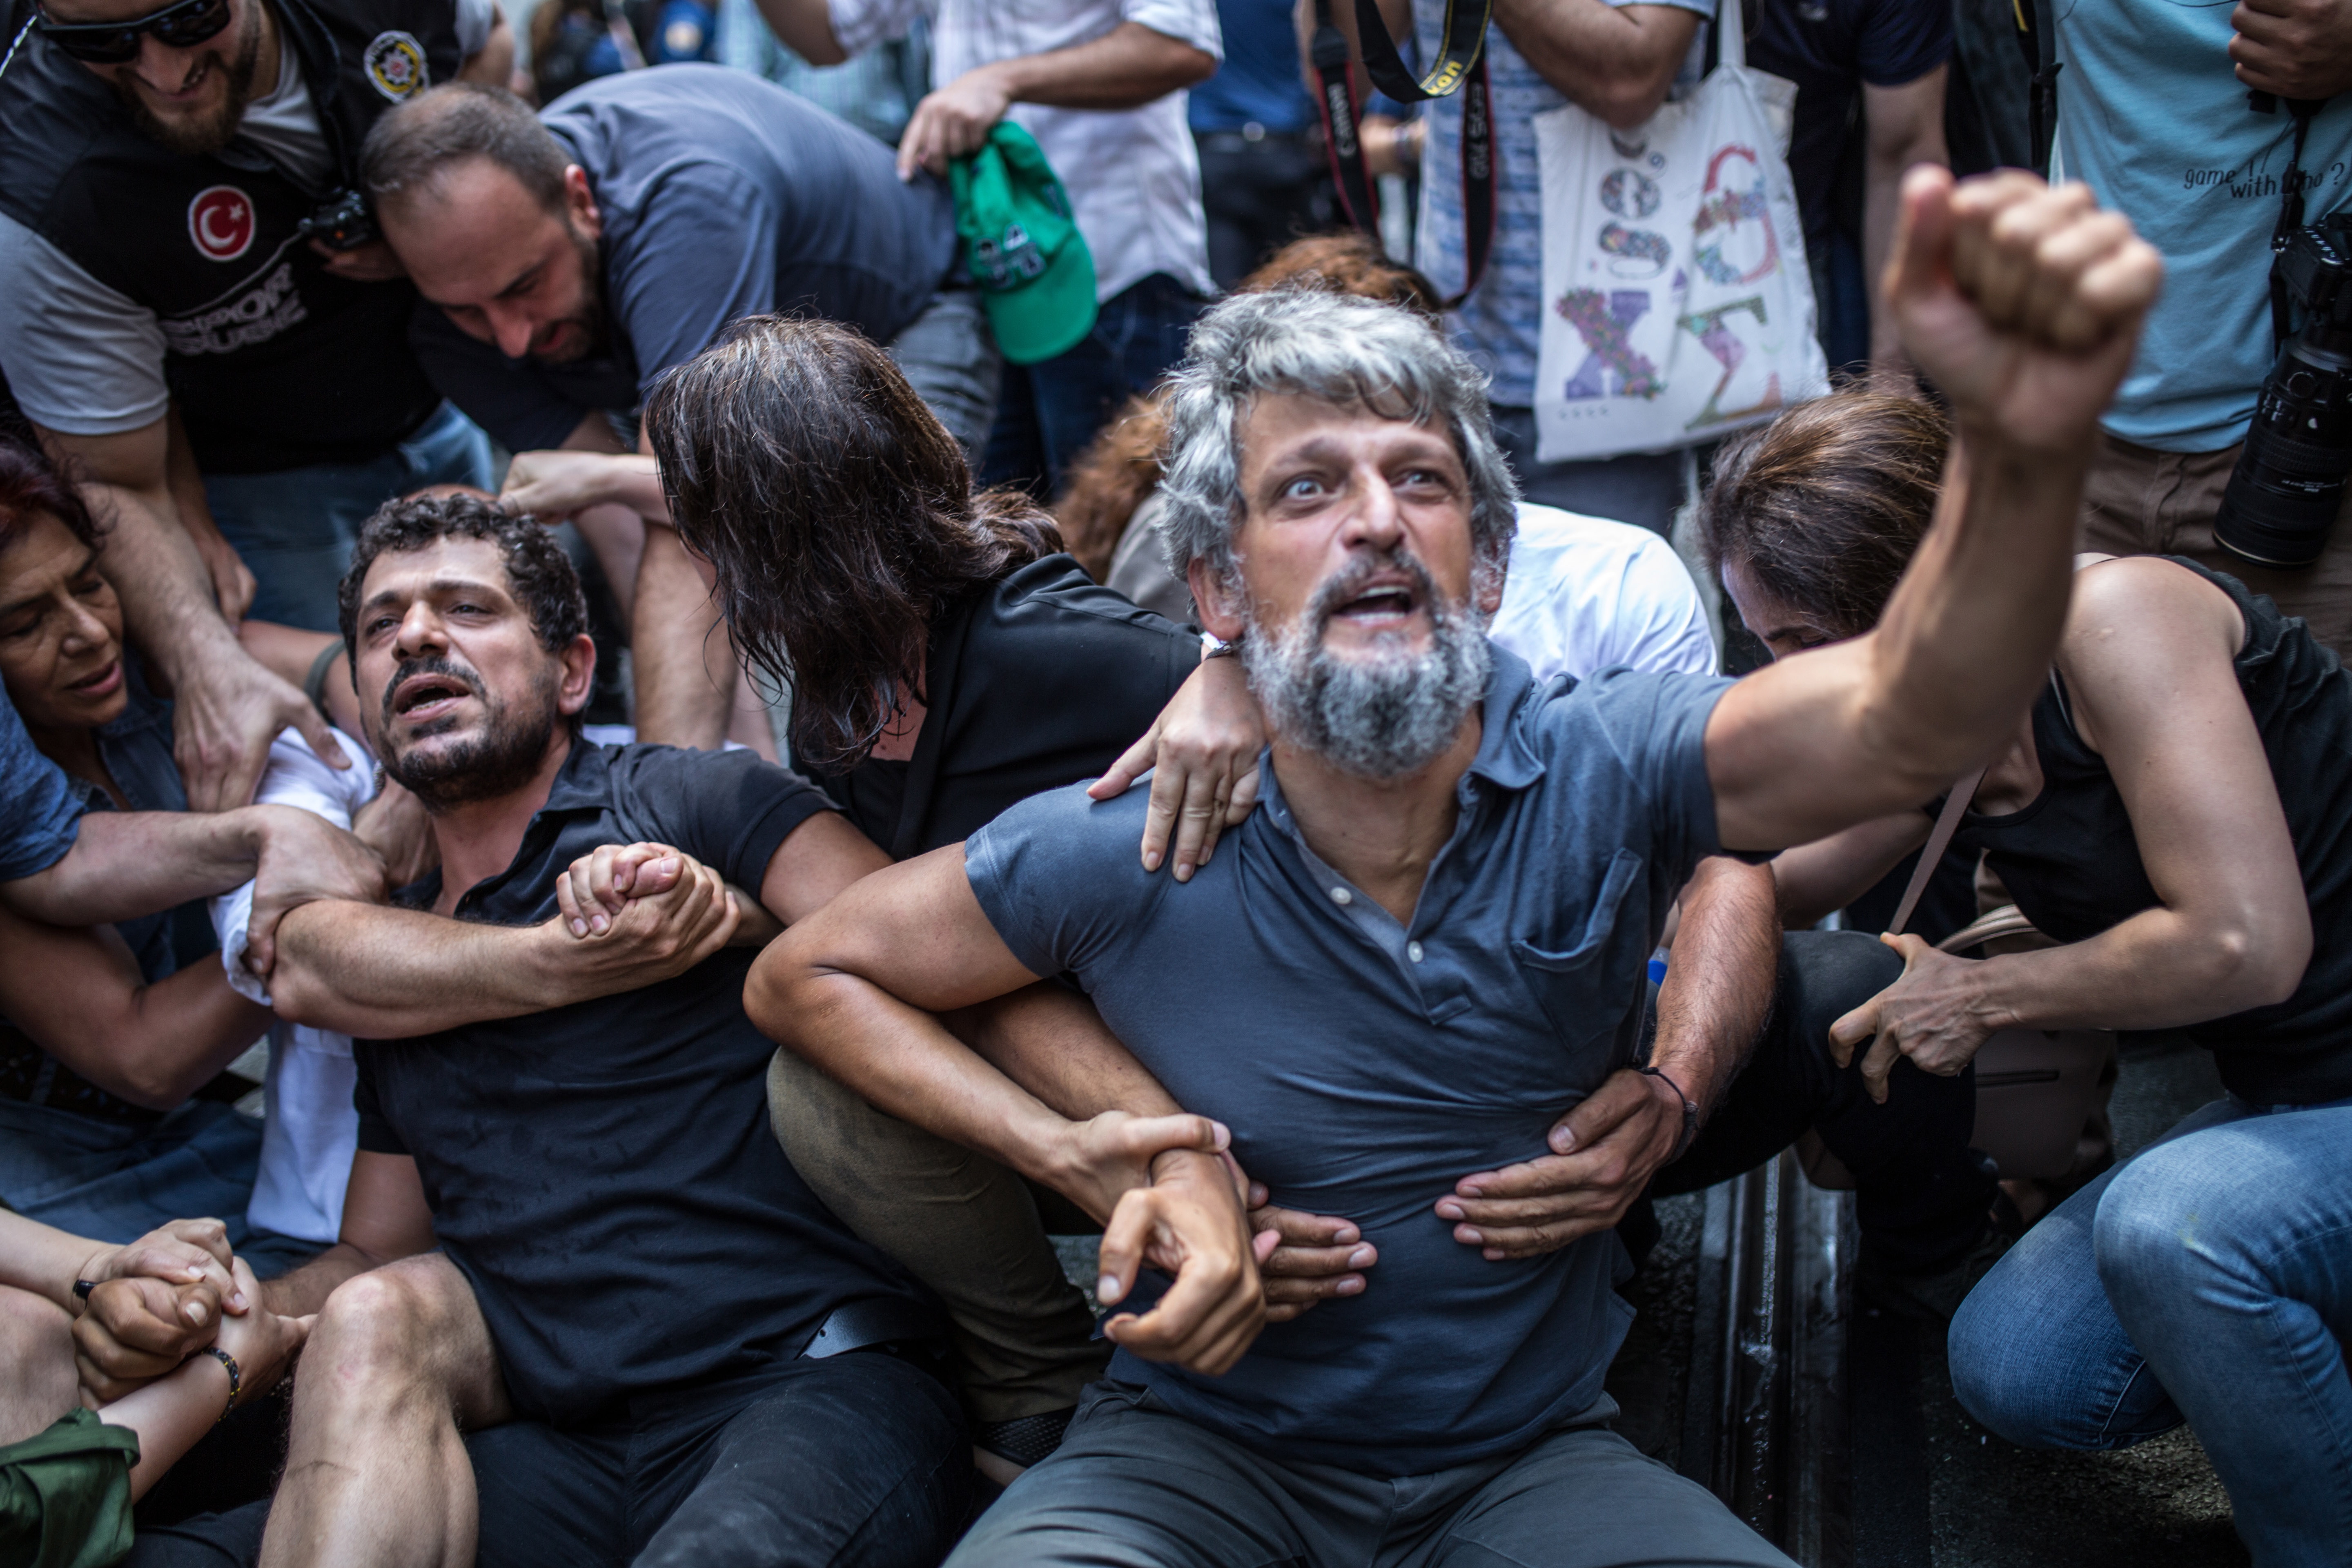 epa06971967 Pro-Kurdish Peoples Democratic Party (HDP) lawmakers Garo Paylan (C) reacts to polices during a Saturday Mothers 700th gathering at Istiklal street in Istanbul, Turkey, 25 August 2018. Mothers are while sits every saturday at Istiklal Street for wives and relatives holding pictures of their relatives and demand clarification for the disappearence of their relatives, who are belived to be arrested, torturted or killed.  EPA/STR